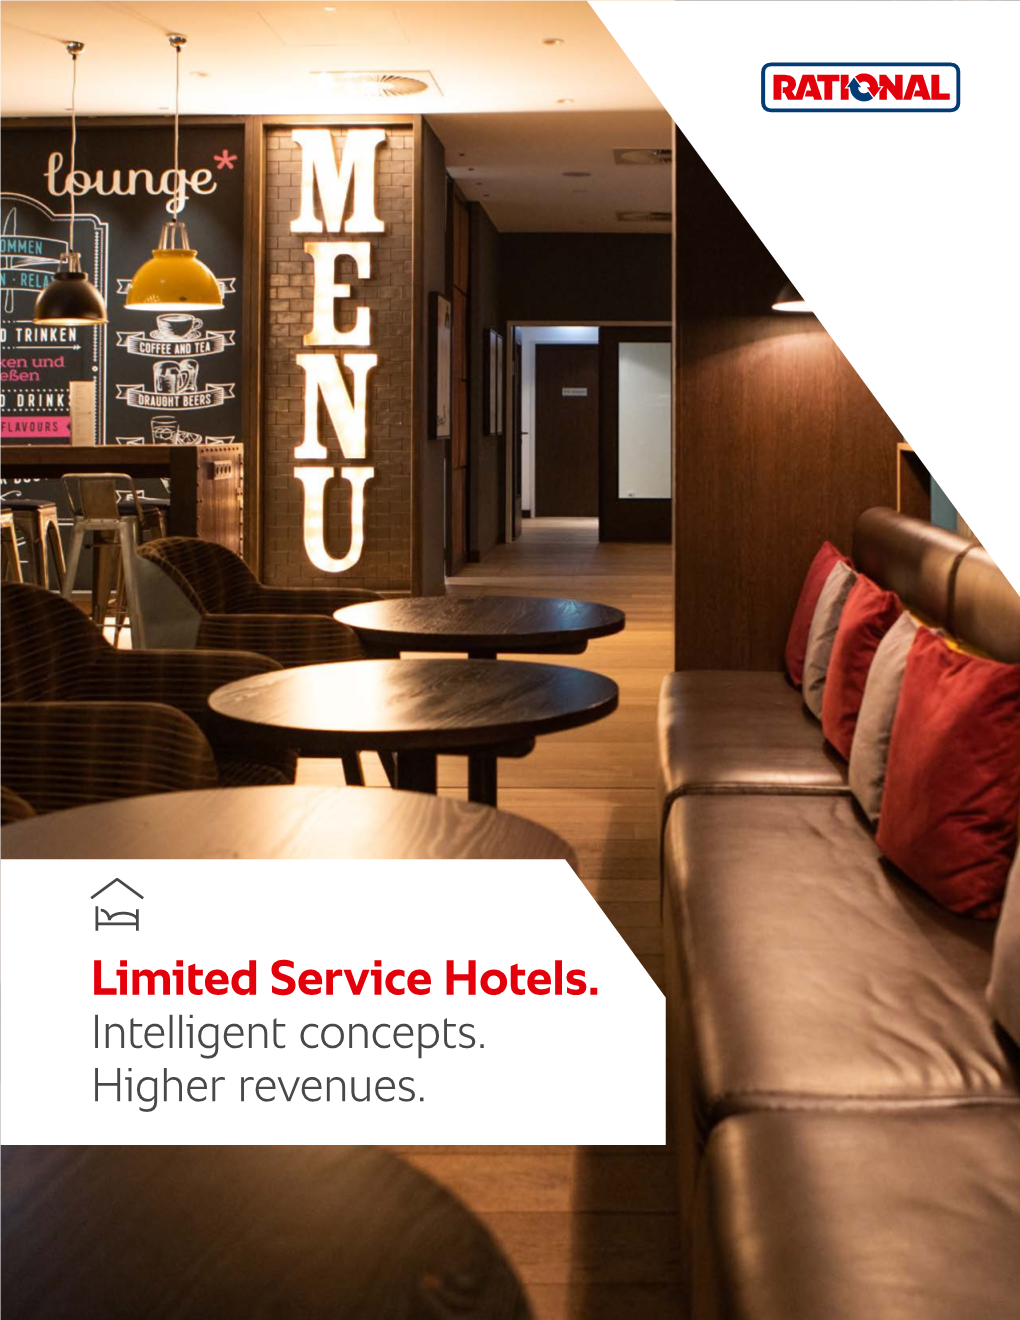 Limited Service Hotels. Intelligent Concepts. Higher Revenues. the Day-To-Day Challenge